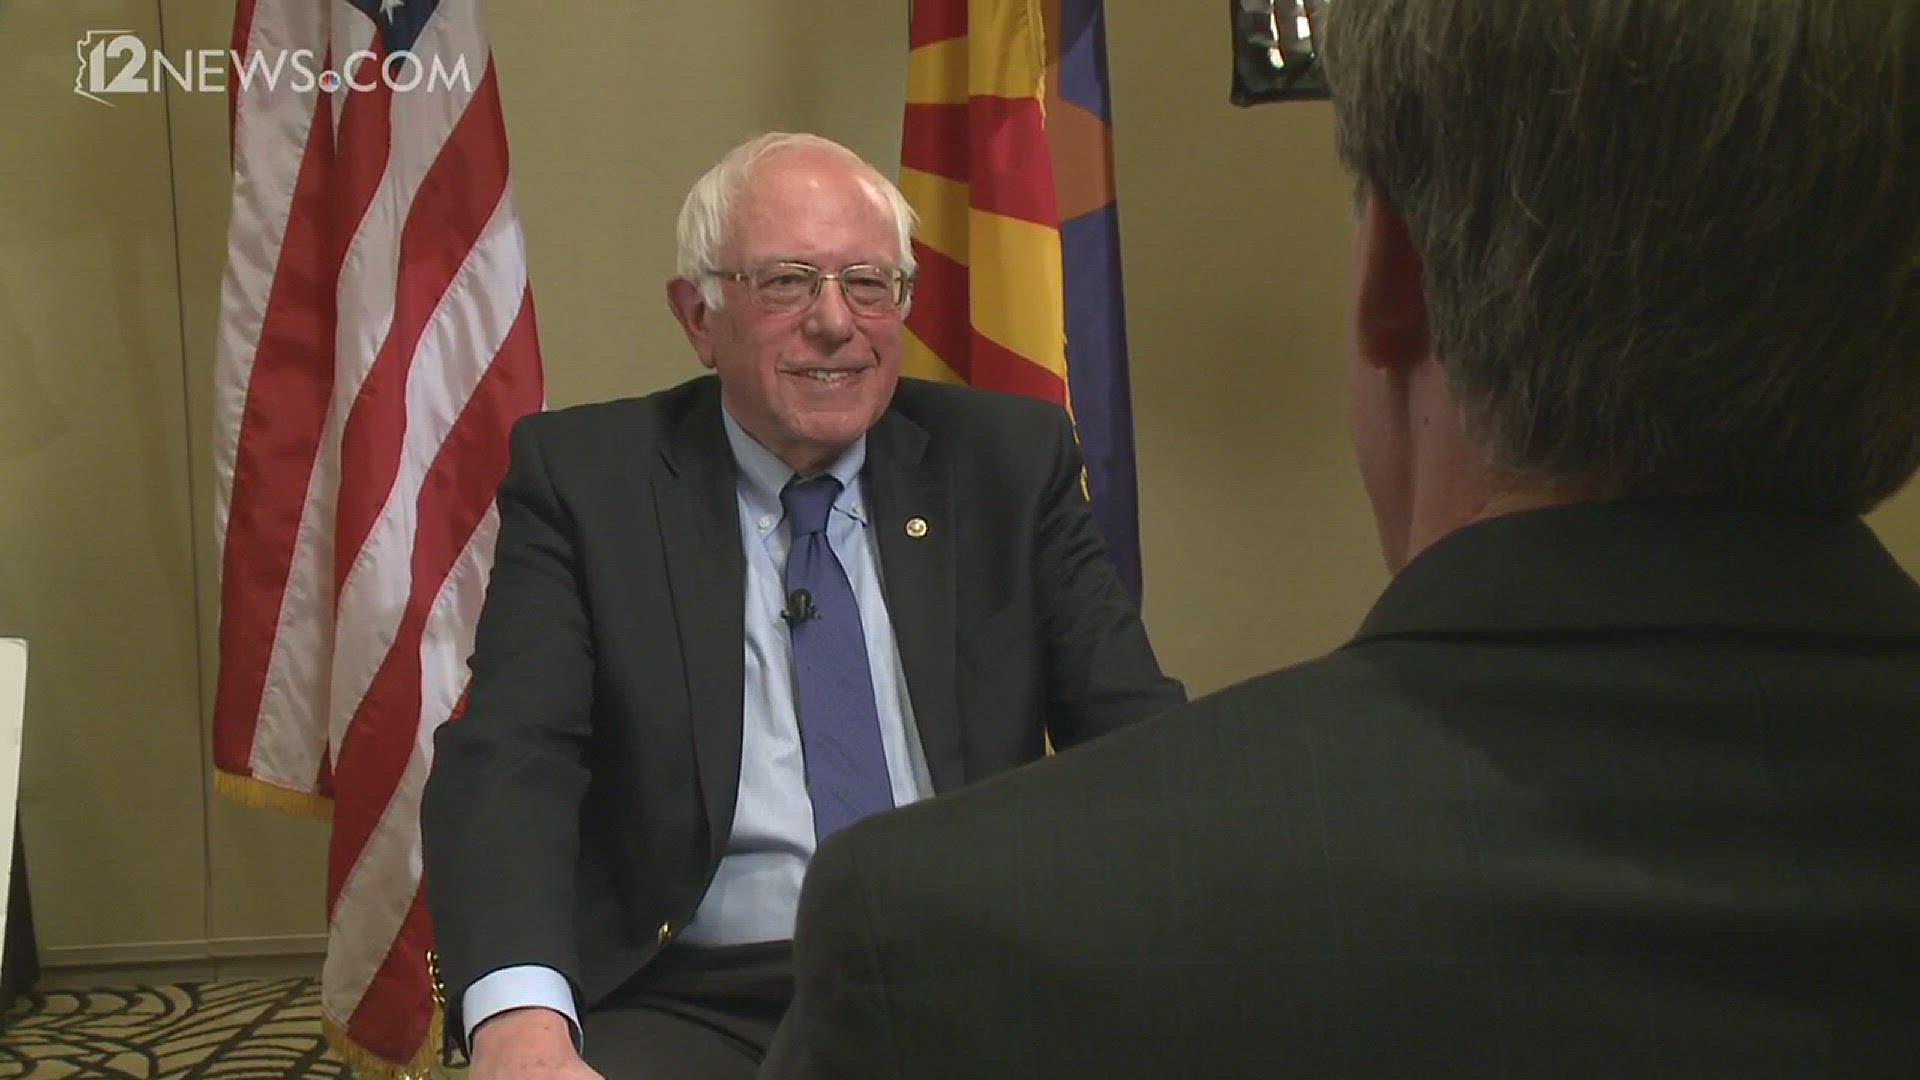 Presidential candidate Bernie Sanders walks out of an interview with 12 News political reporter Brahm Resnik, before a stump speech near Flagstaff, Ariz.on March 17, 2016.